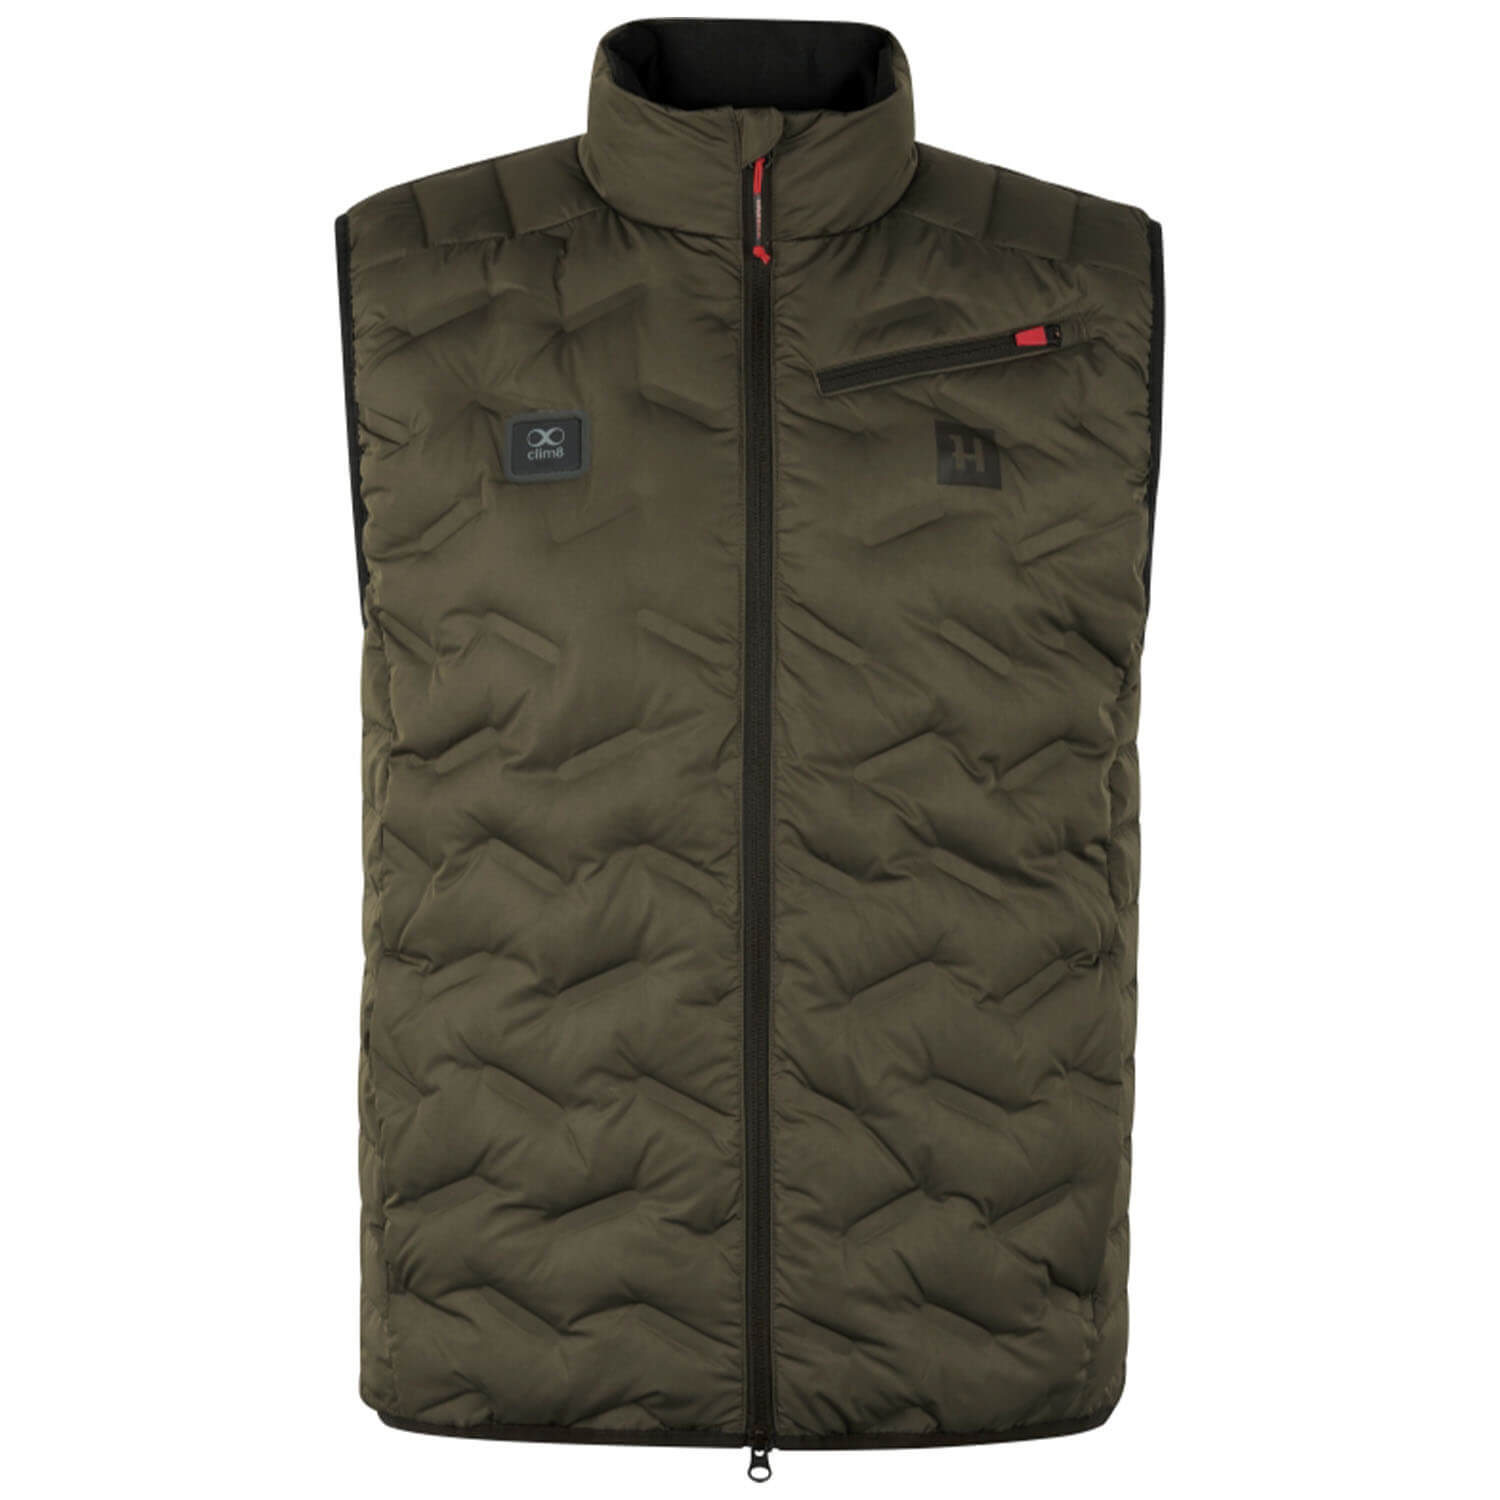 Härkila Heat Vest Clim8 Insulated (Willow Green) - Heated Clothing